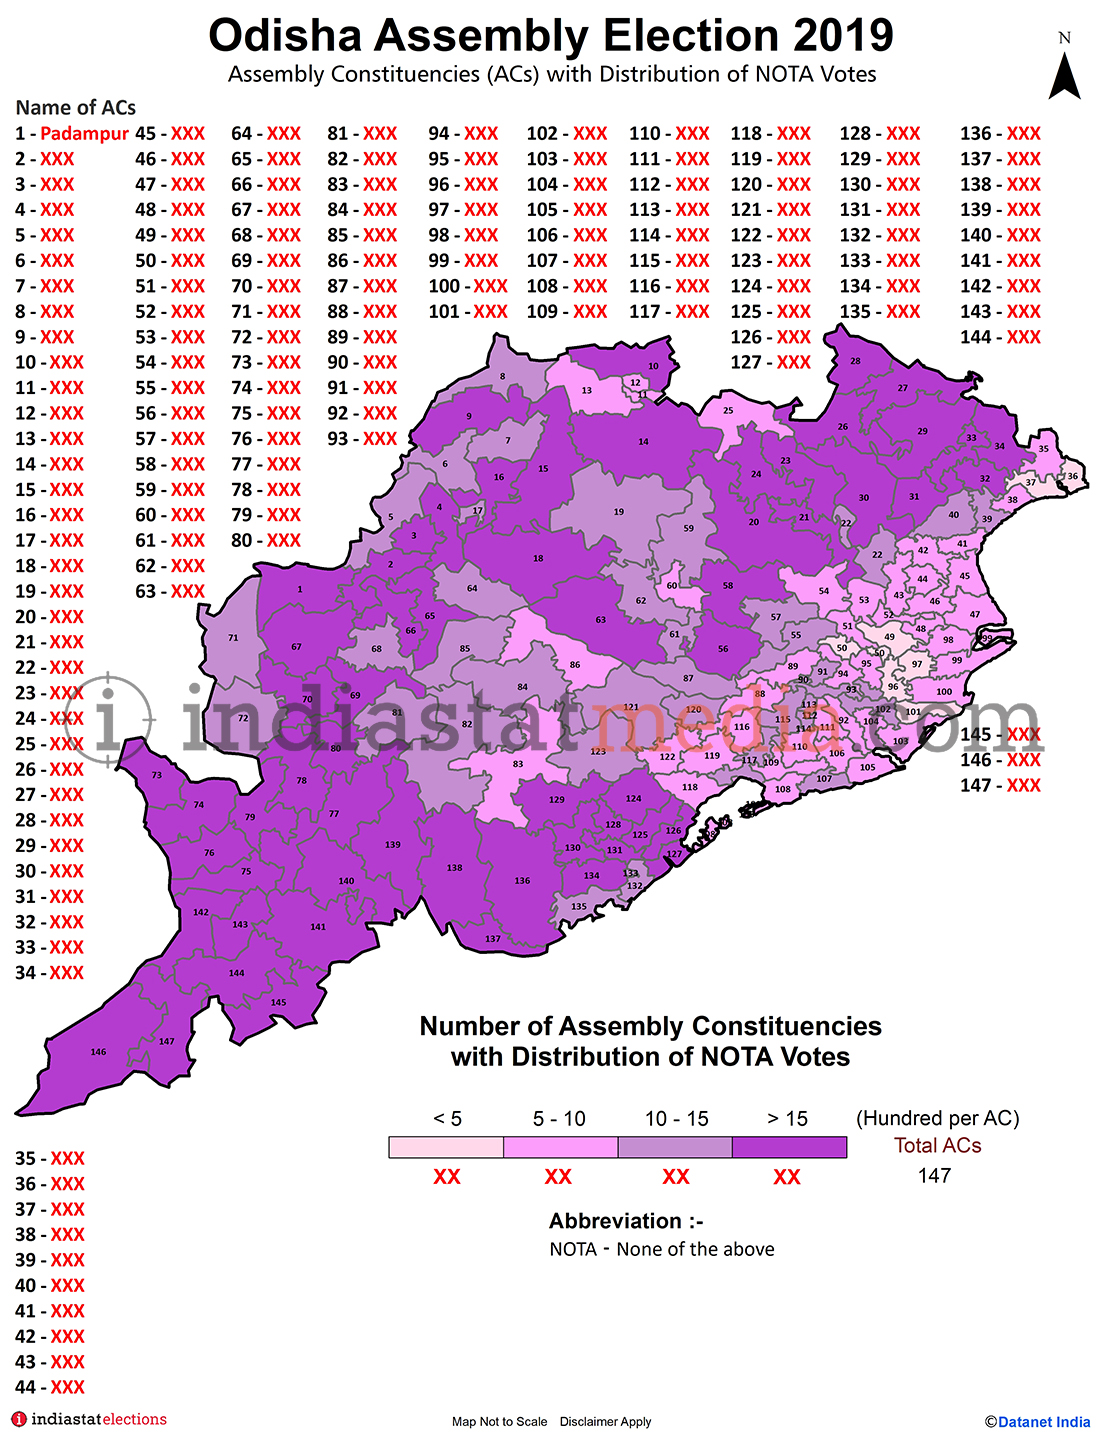 Distribution of NOTA Votes by Constituencies in Odisha (Assembly Election - 2019)